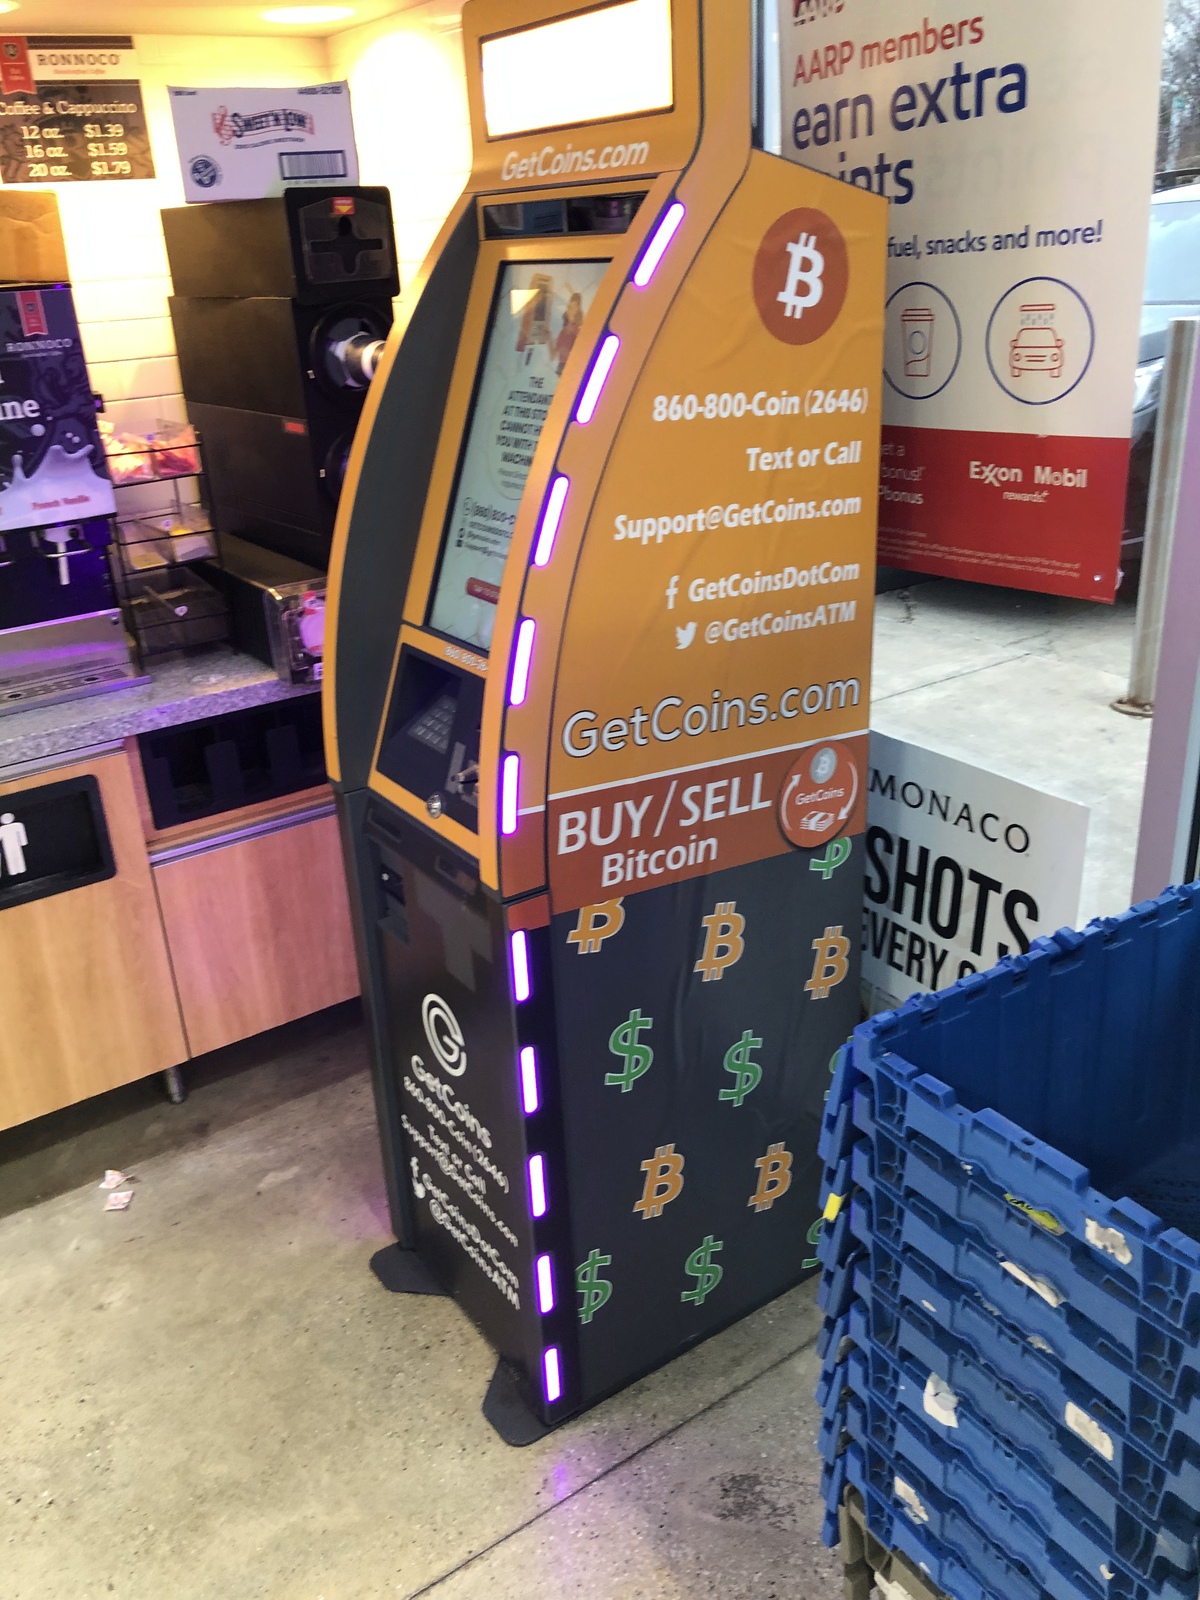 Getcoins - Bitcoin ATM - Inside of Mobil in Rosemont, Illinois